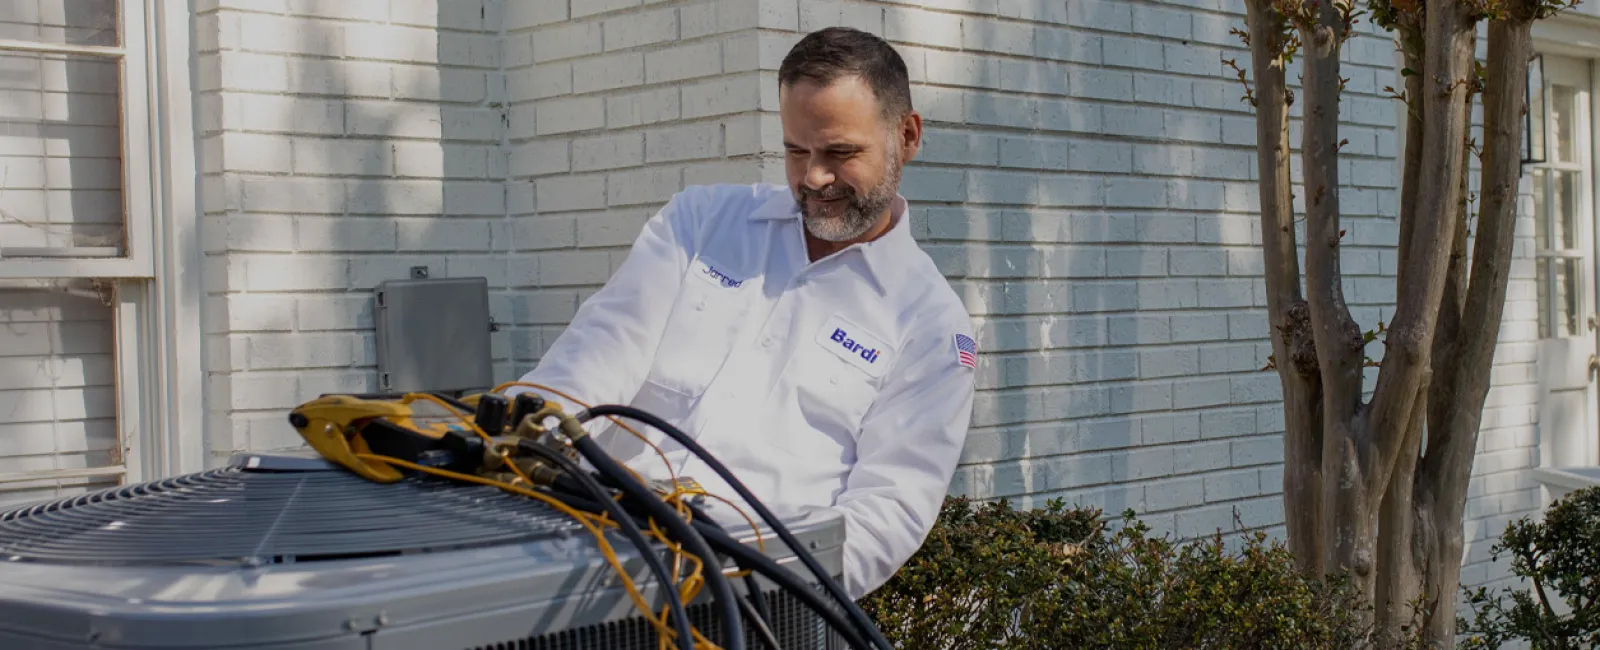 Commercial HVAC Contractors: Frequently Asked Questions